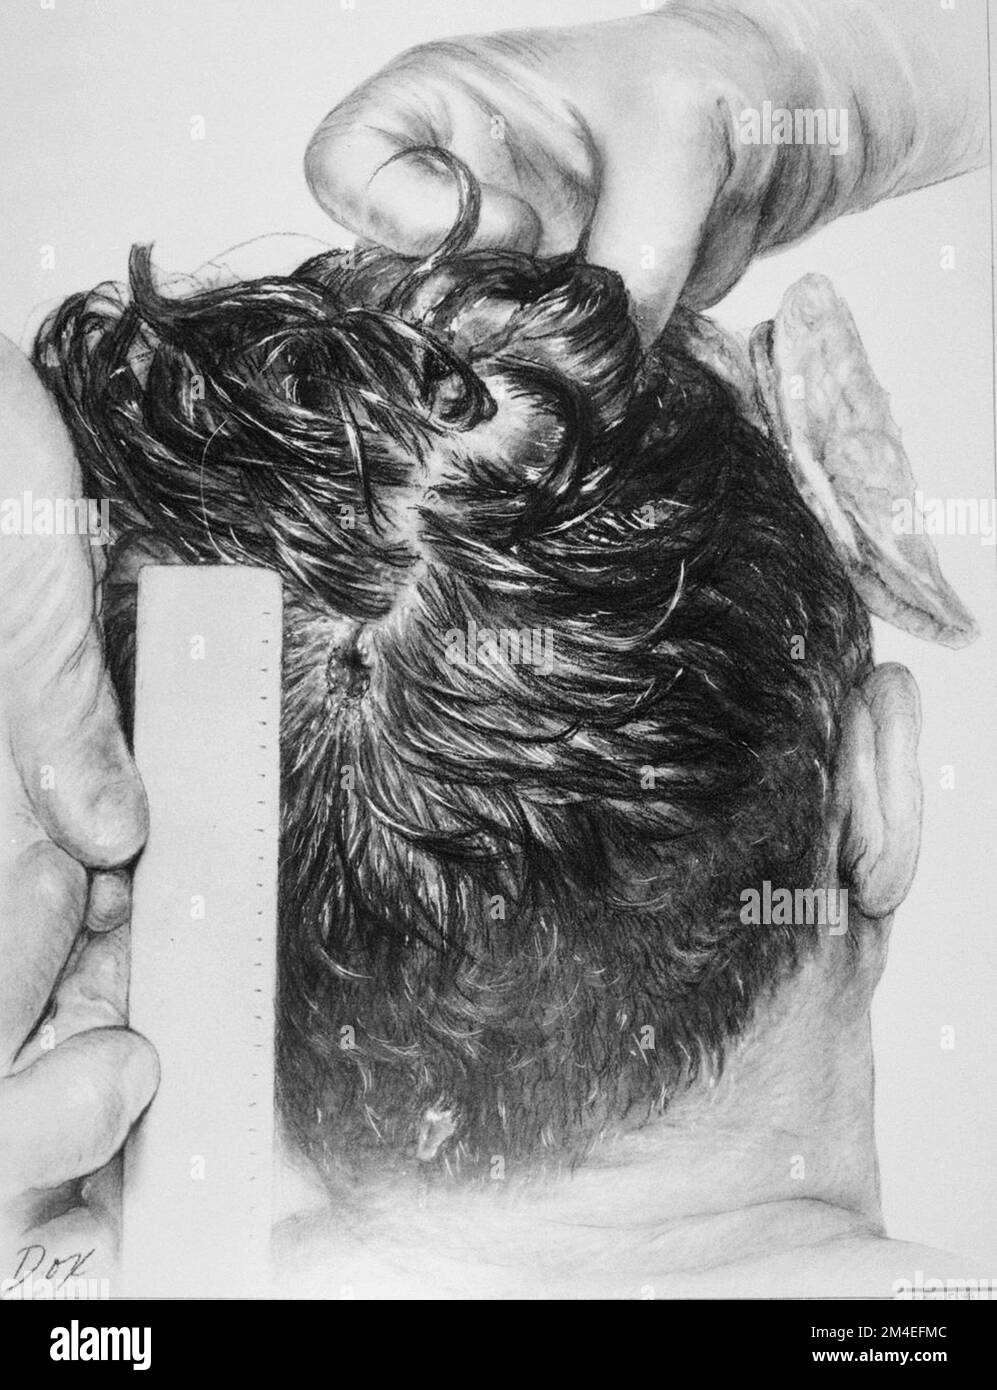 Drawing depicting the posterior head wound of U.S. President John F. Kennedy. The hand at the top is holding a portion of his scalp in place. Made by medical illustrator Ida G. Dox from an autopsy photograph, Stock Photo